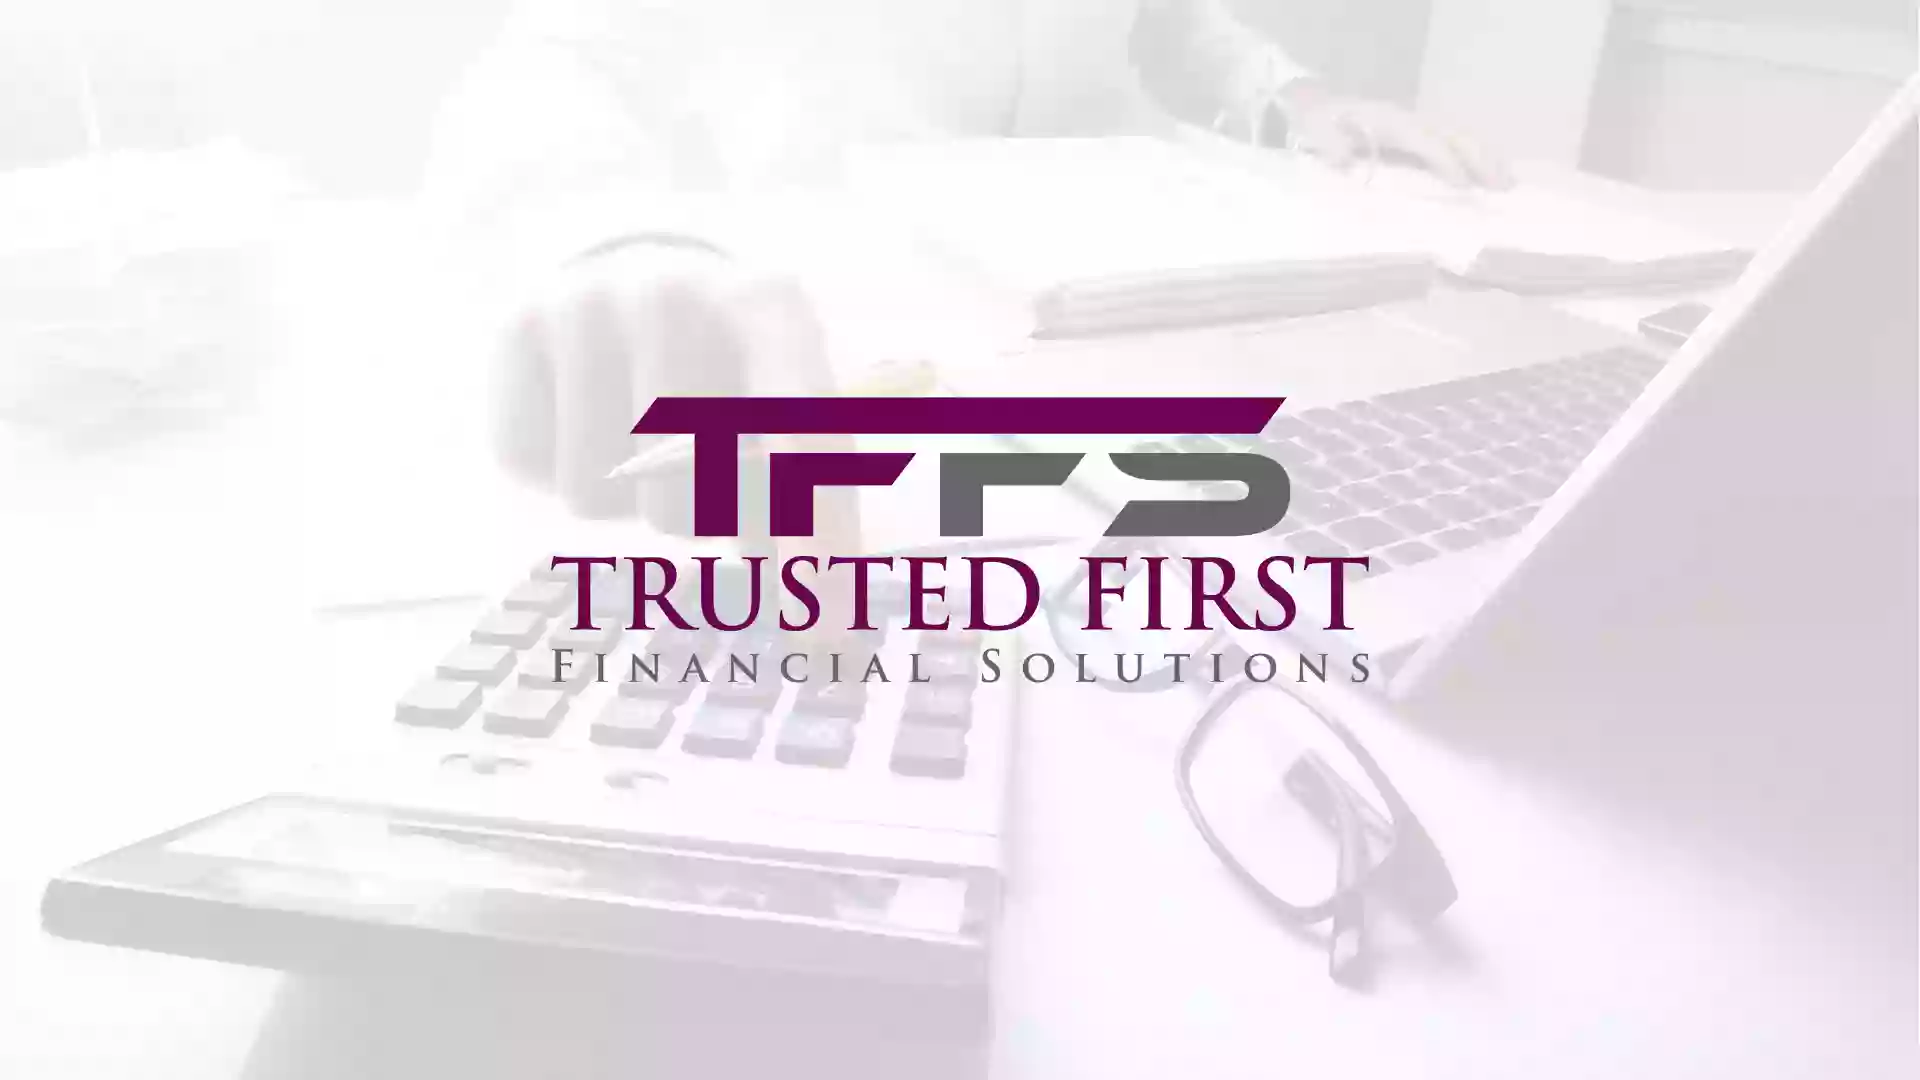 Trusted First Financial Solutions